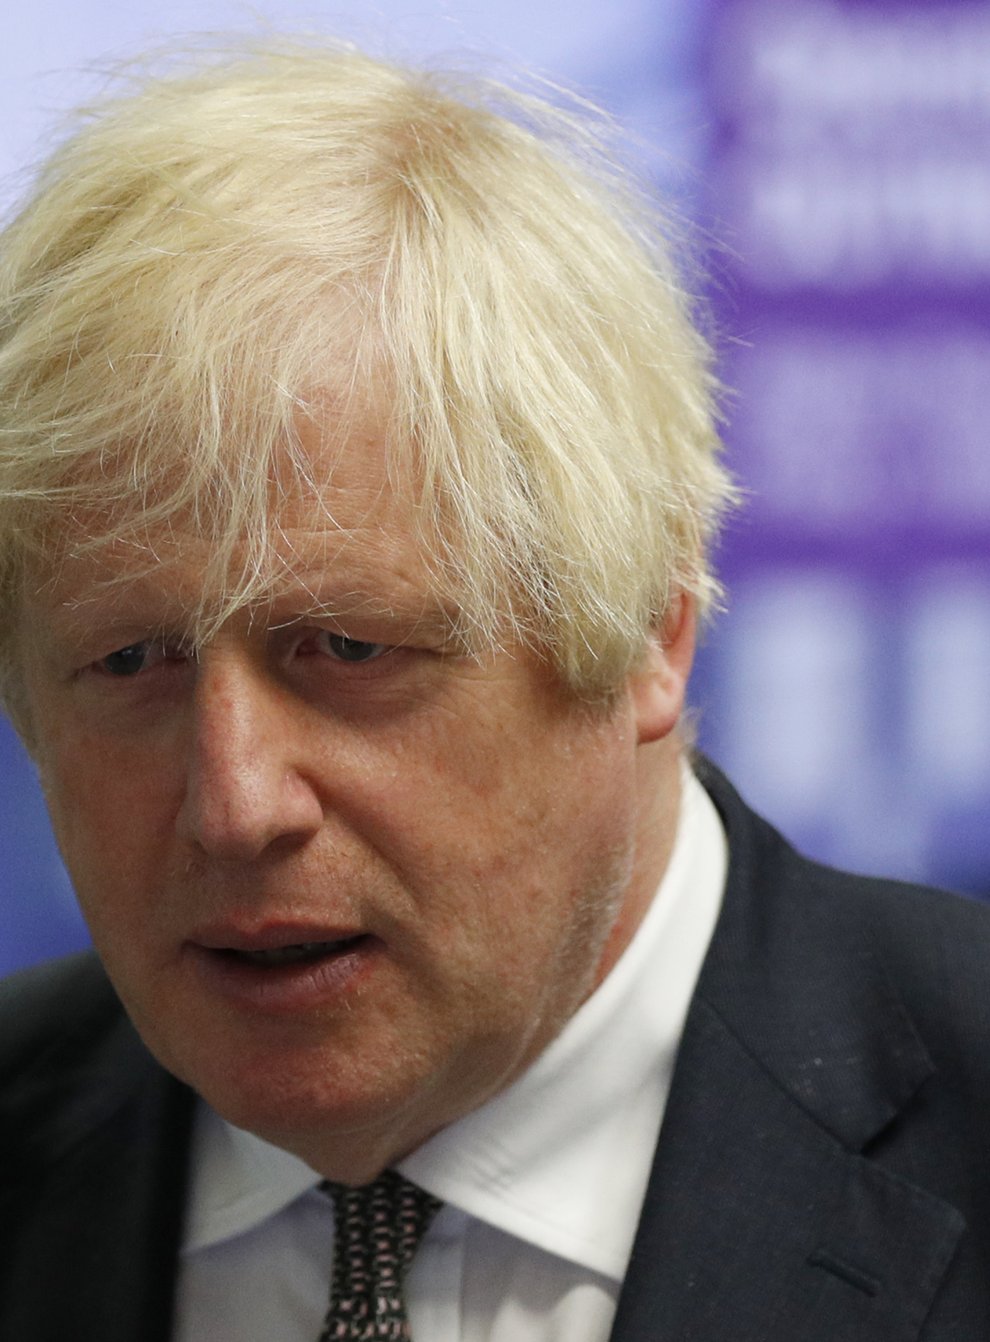 Prime Minister Boris Johnson has suggested the cut in Universal Credit will go ahead, saying his ‘strong preference’ is to see wages rise through people’s own efforts rather than through ‘taxation of other people’ (Adrian Dennis/PA)